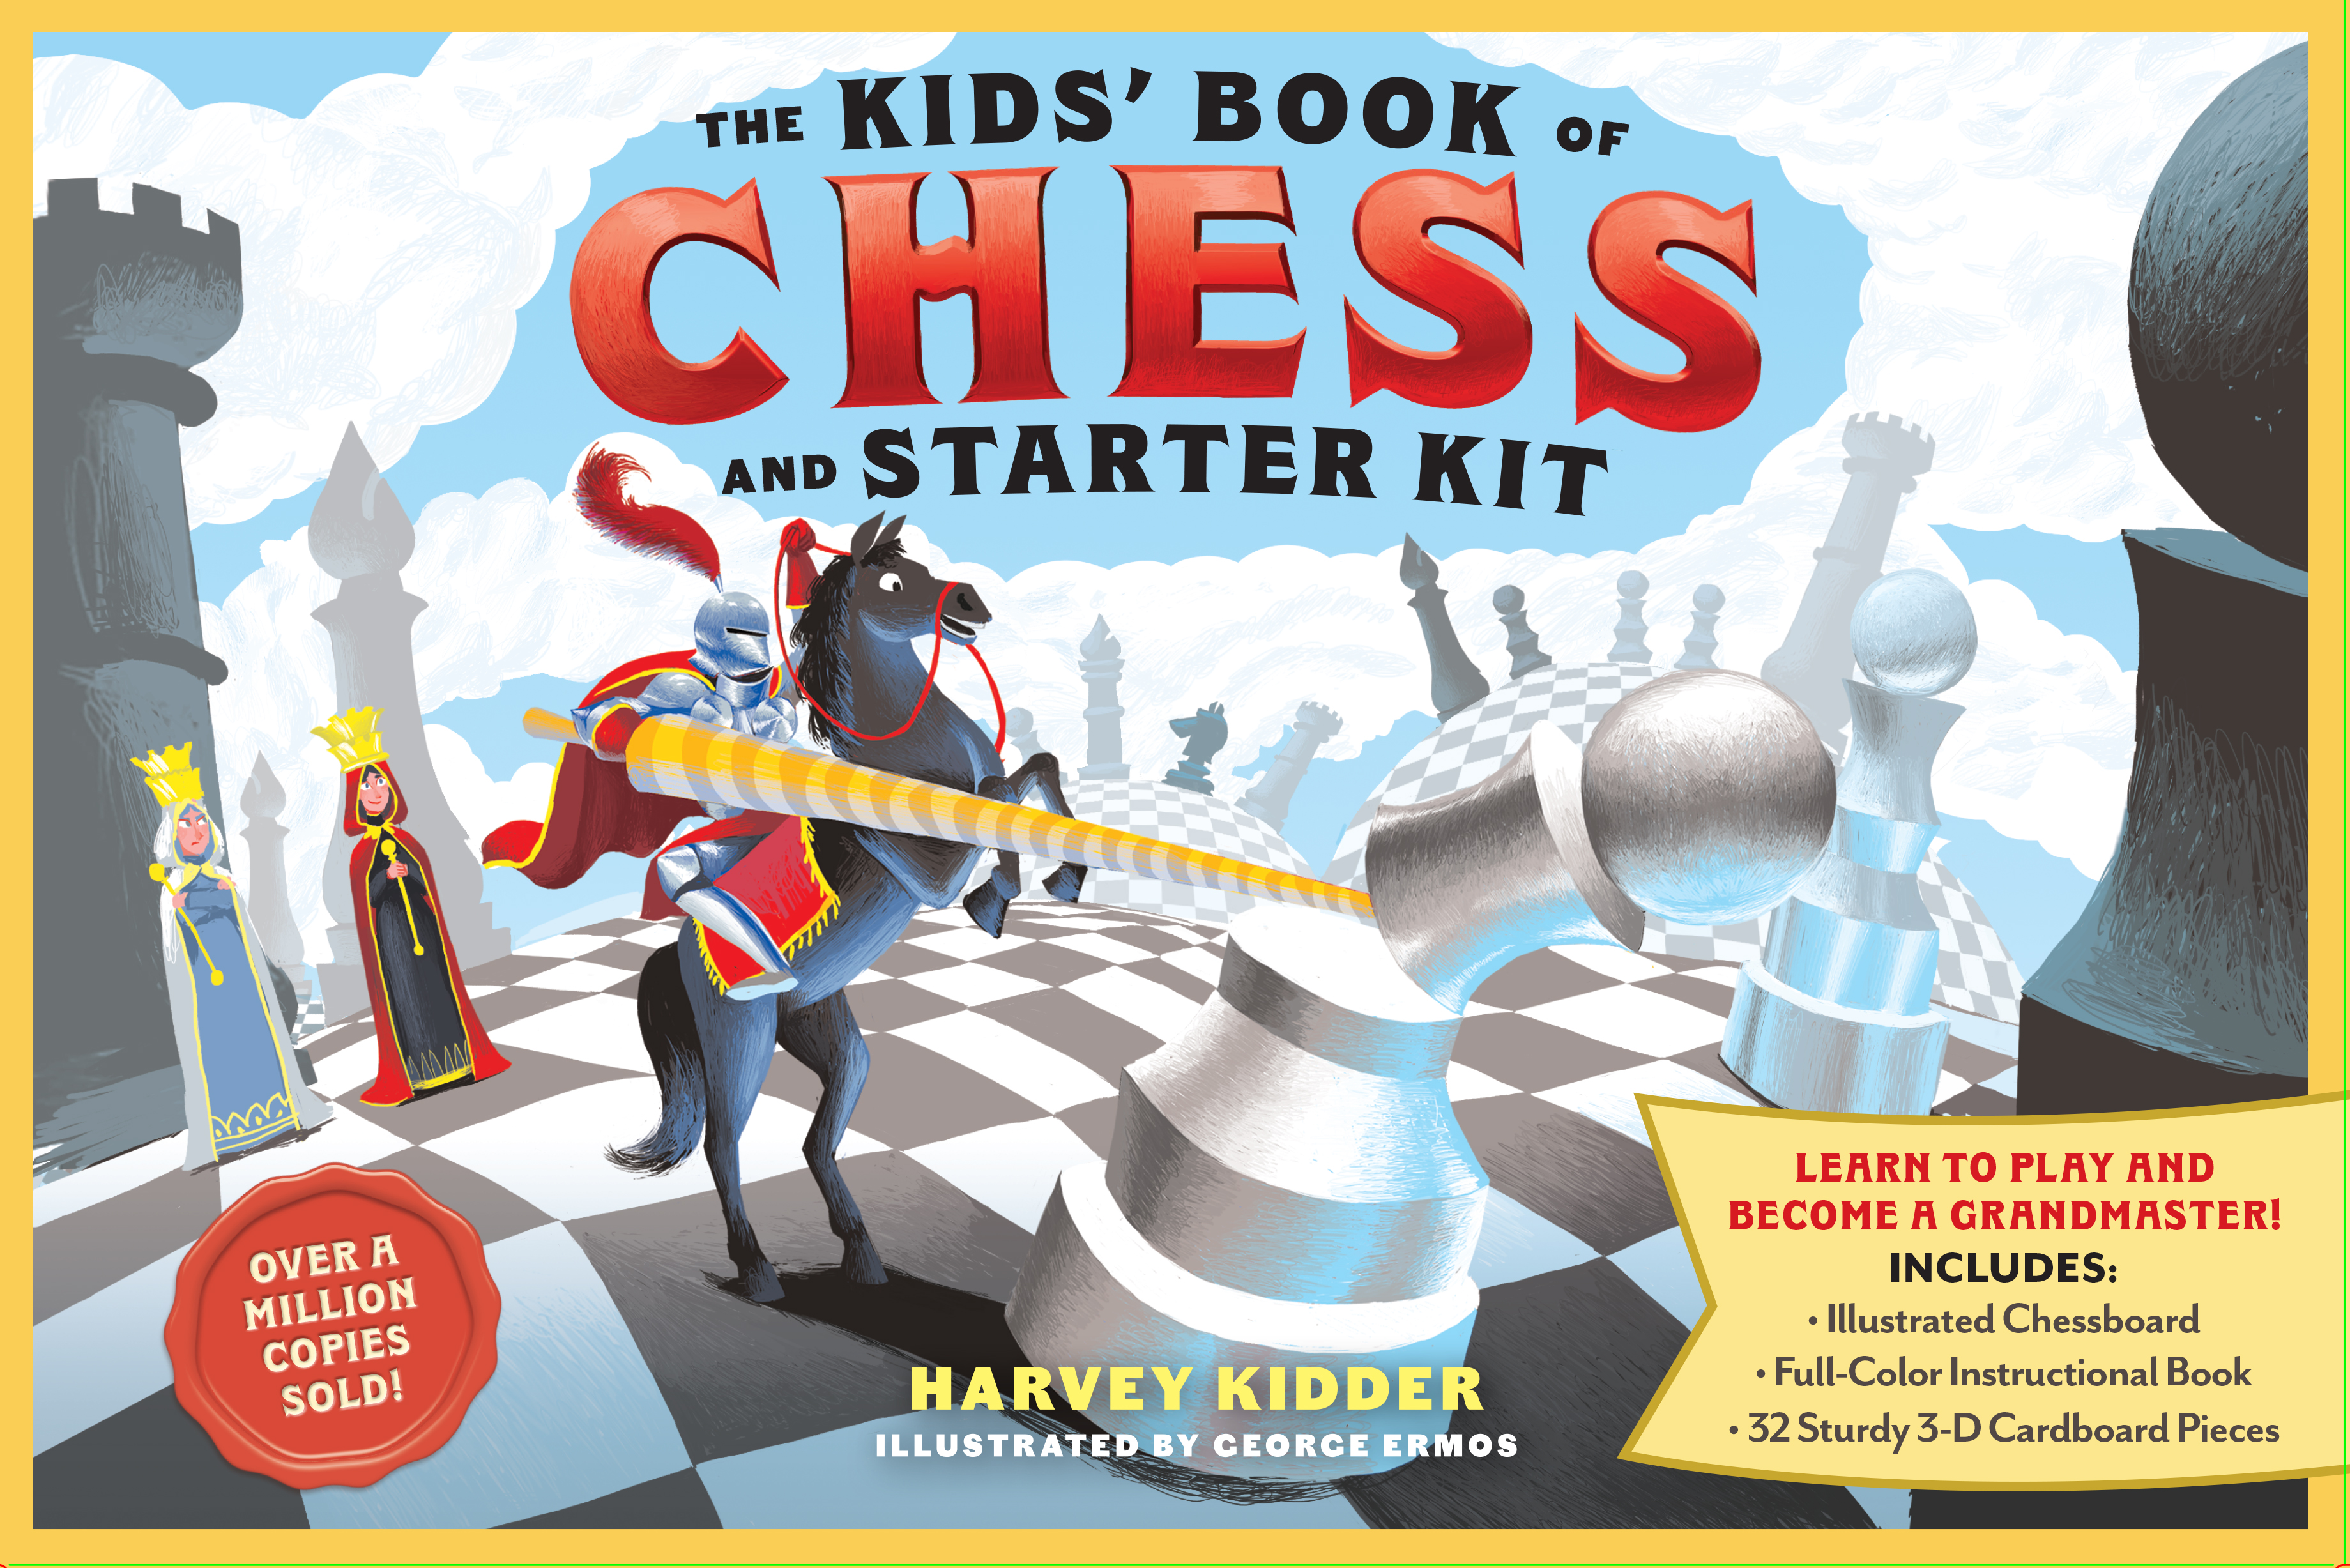 Kids' Book of Chess and Starter Kit, The